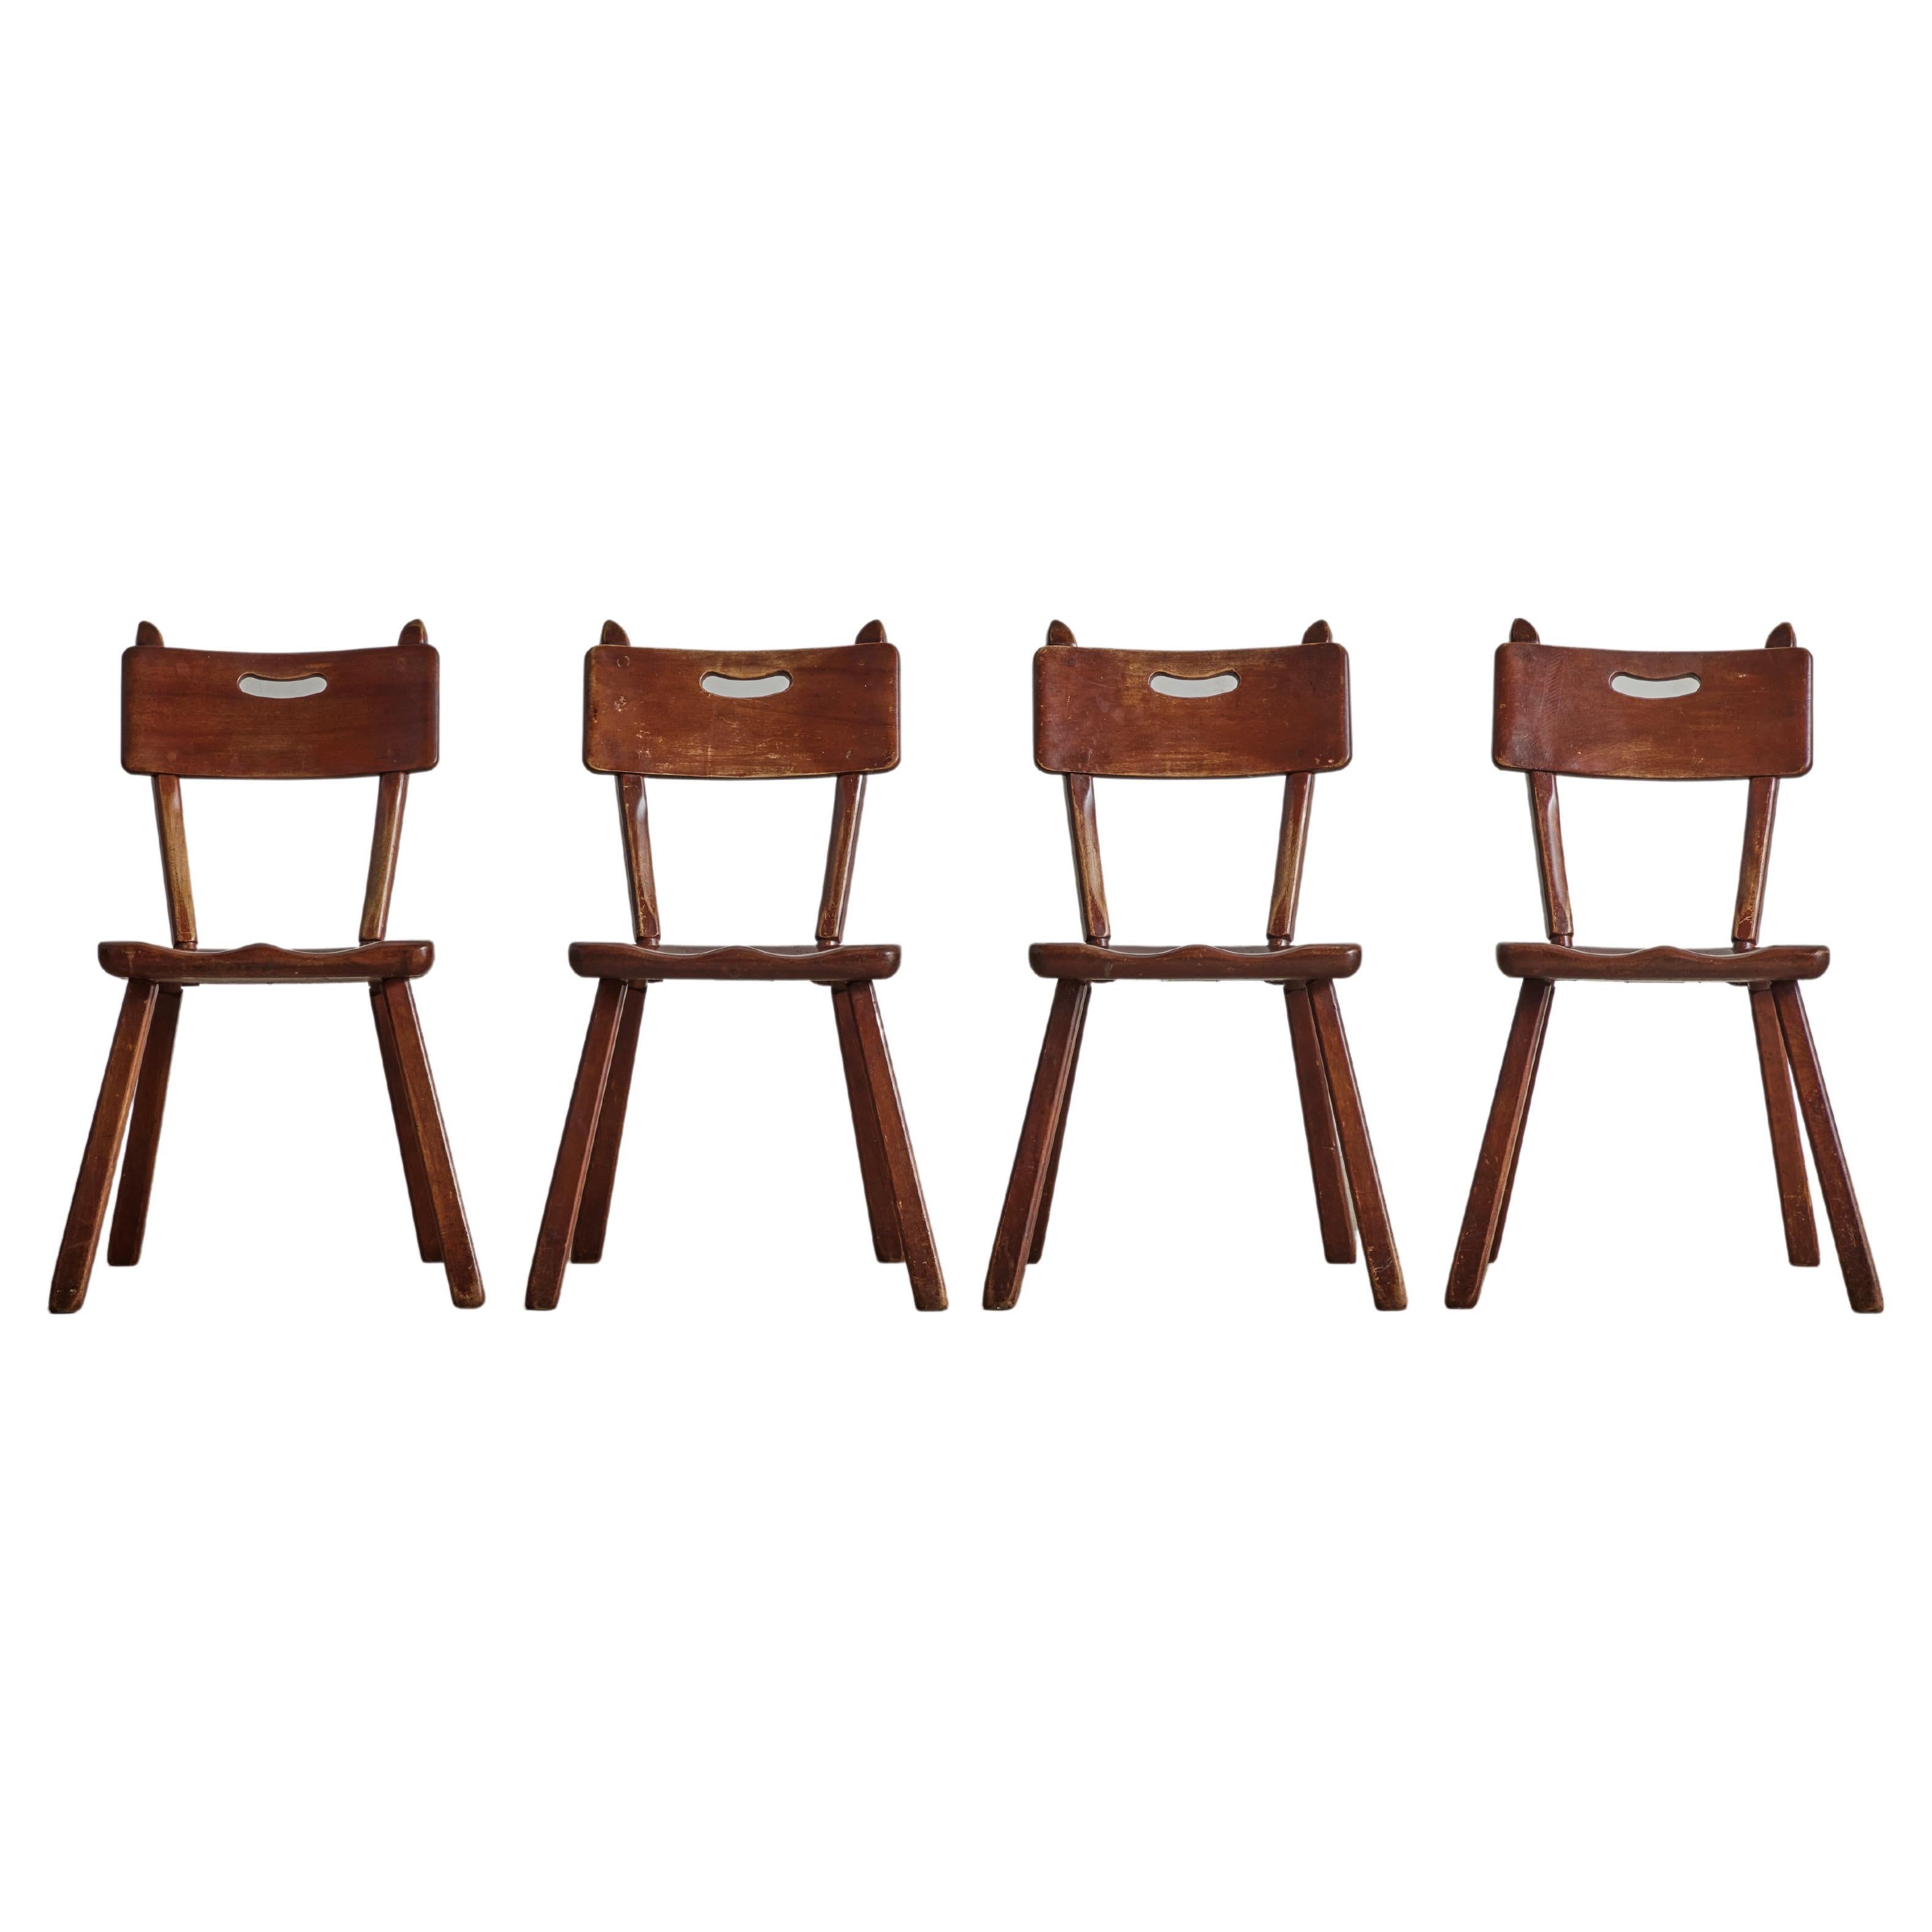 Set of Four Herman de Vries Dining Chairs